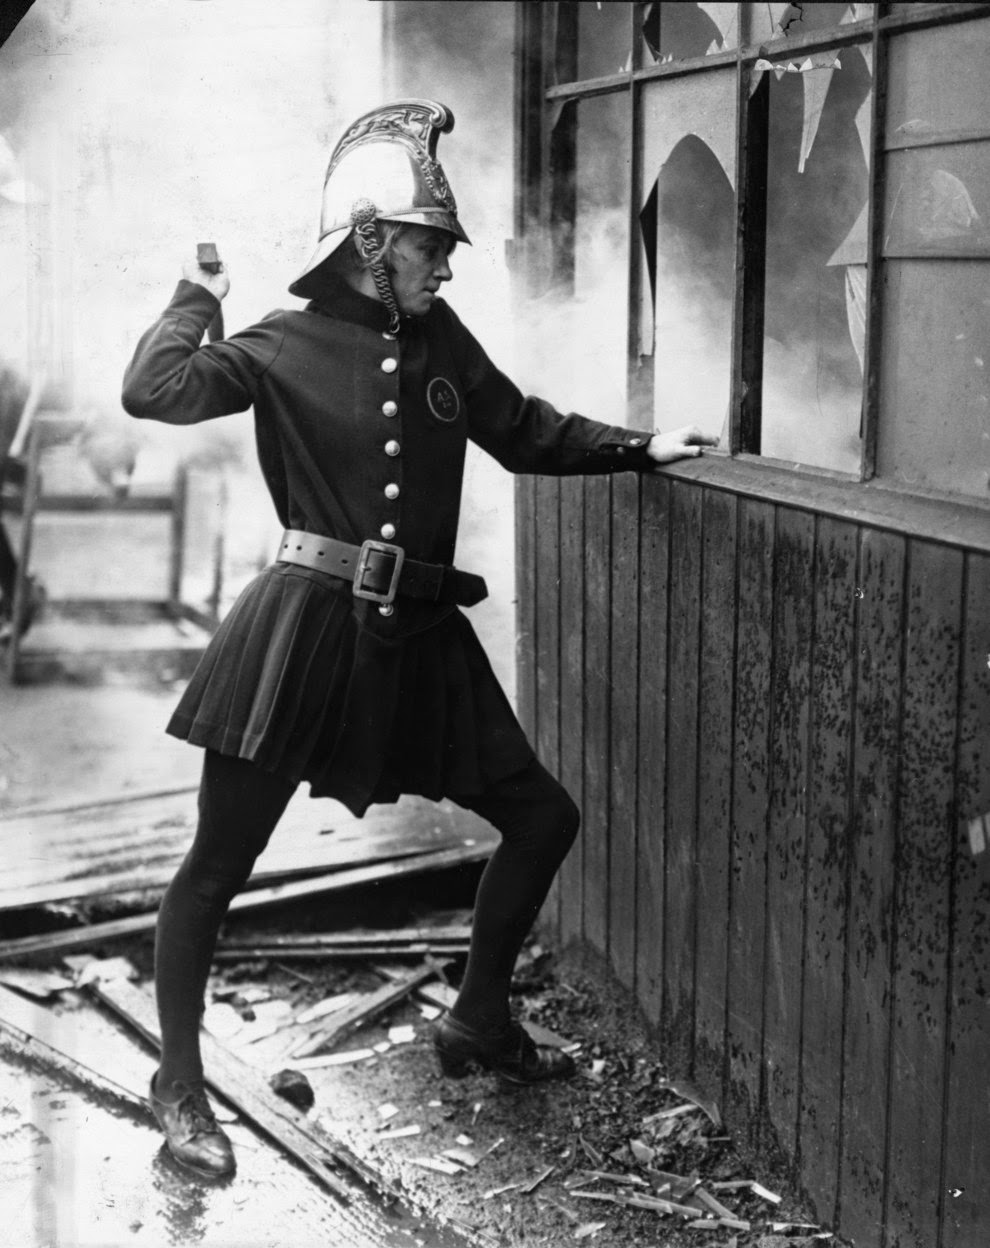 A woman firefighter of the Achille Serre Ladies Fire Brigade in London, 1925.